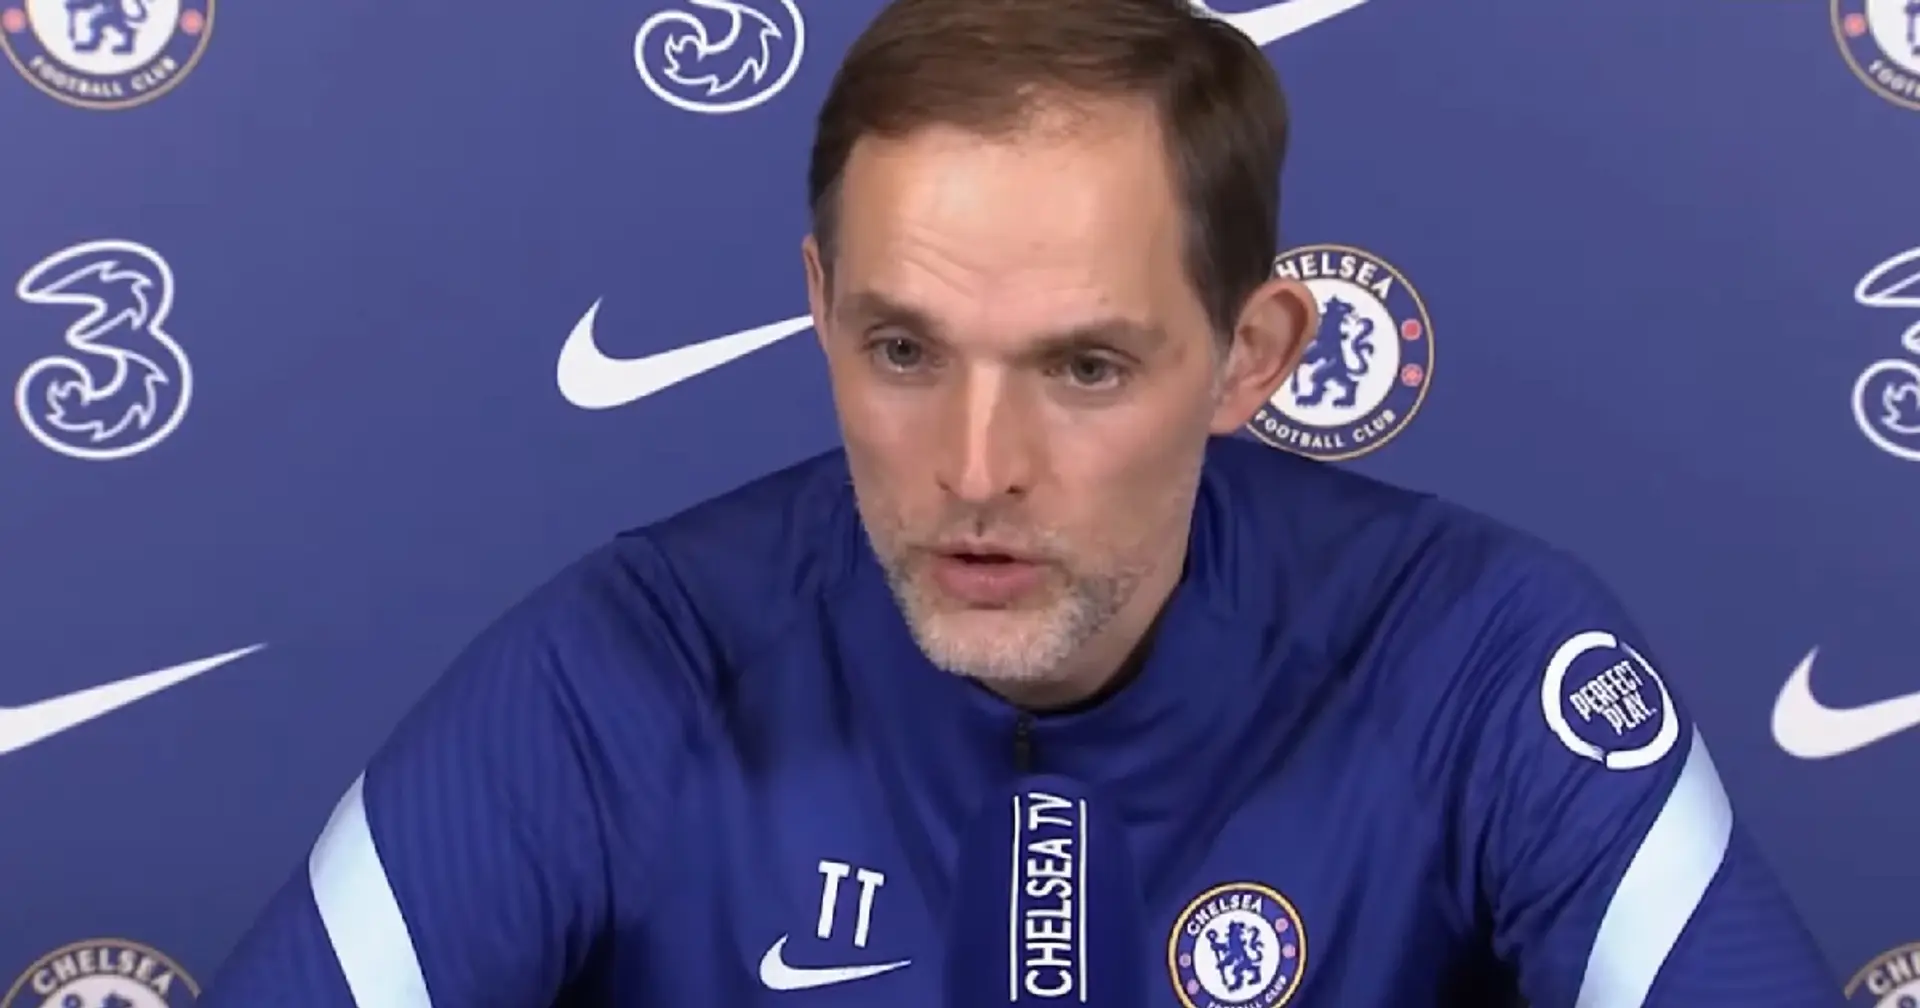 'When I started, he was as far away as the moon': Tuchel on his first time facing Mourinho